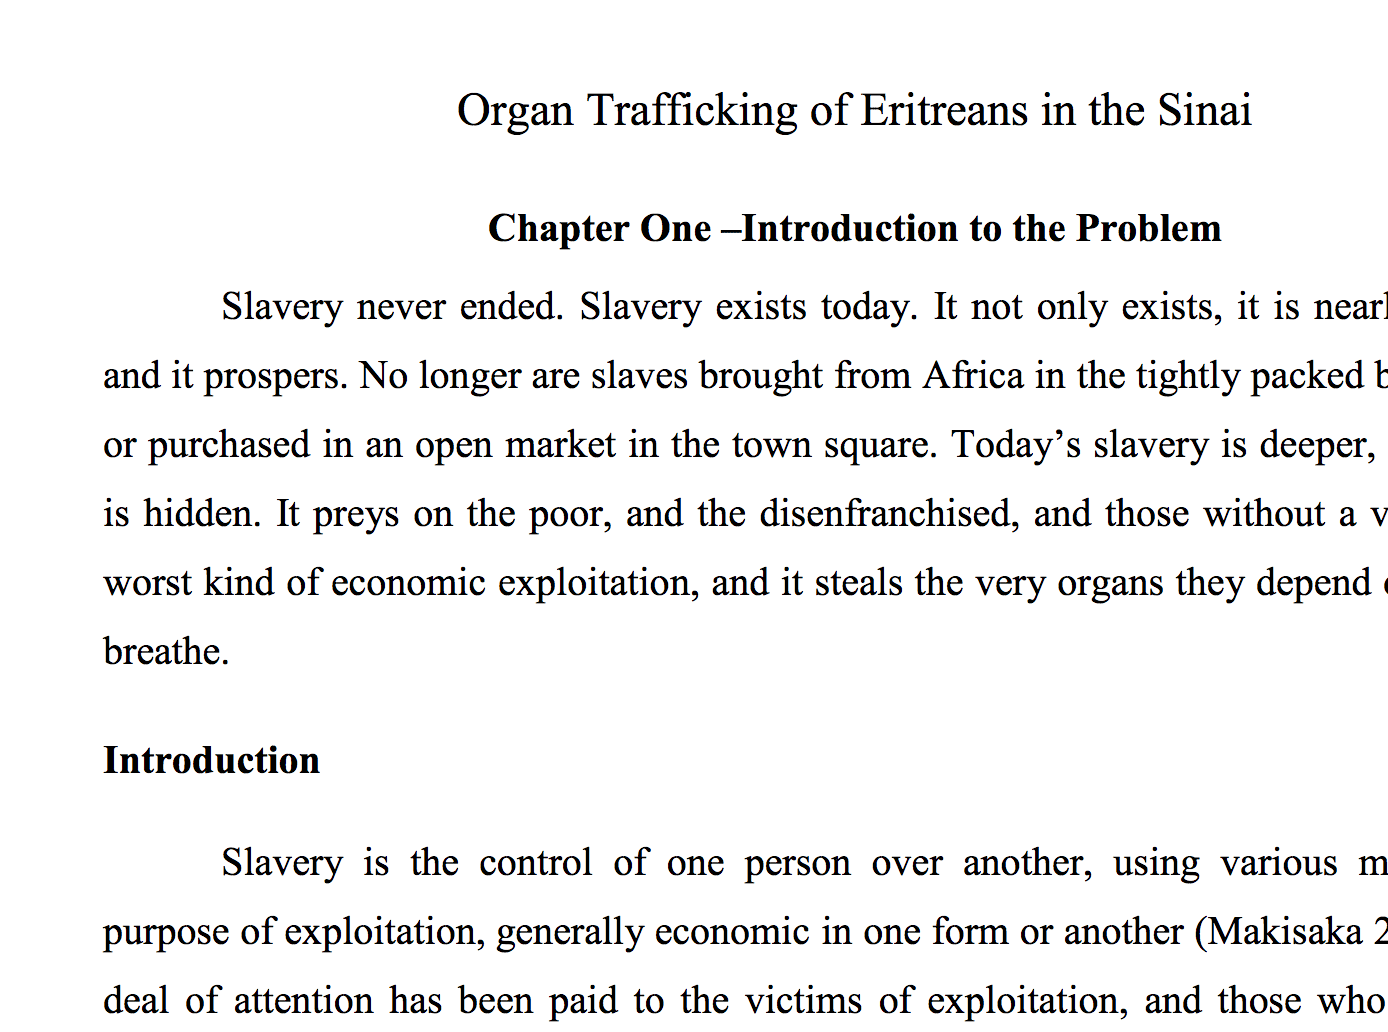 Organ Trafficking of Eritreans in the Sinai: Perpetration or Provision of Service?